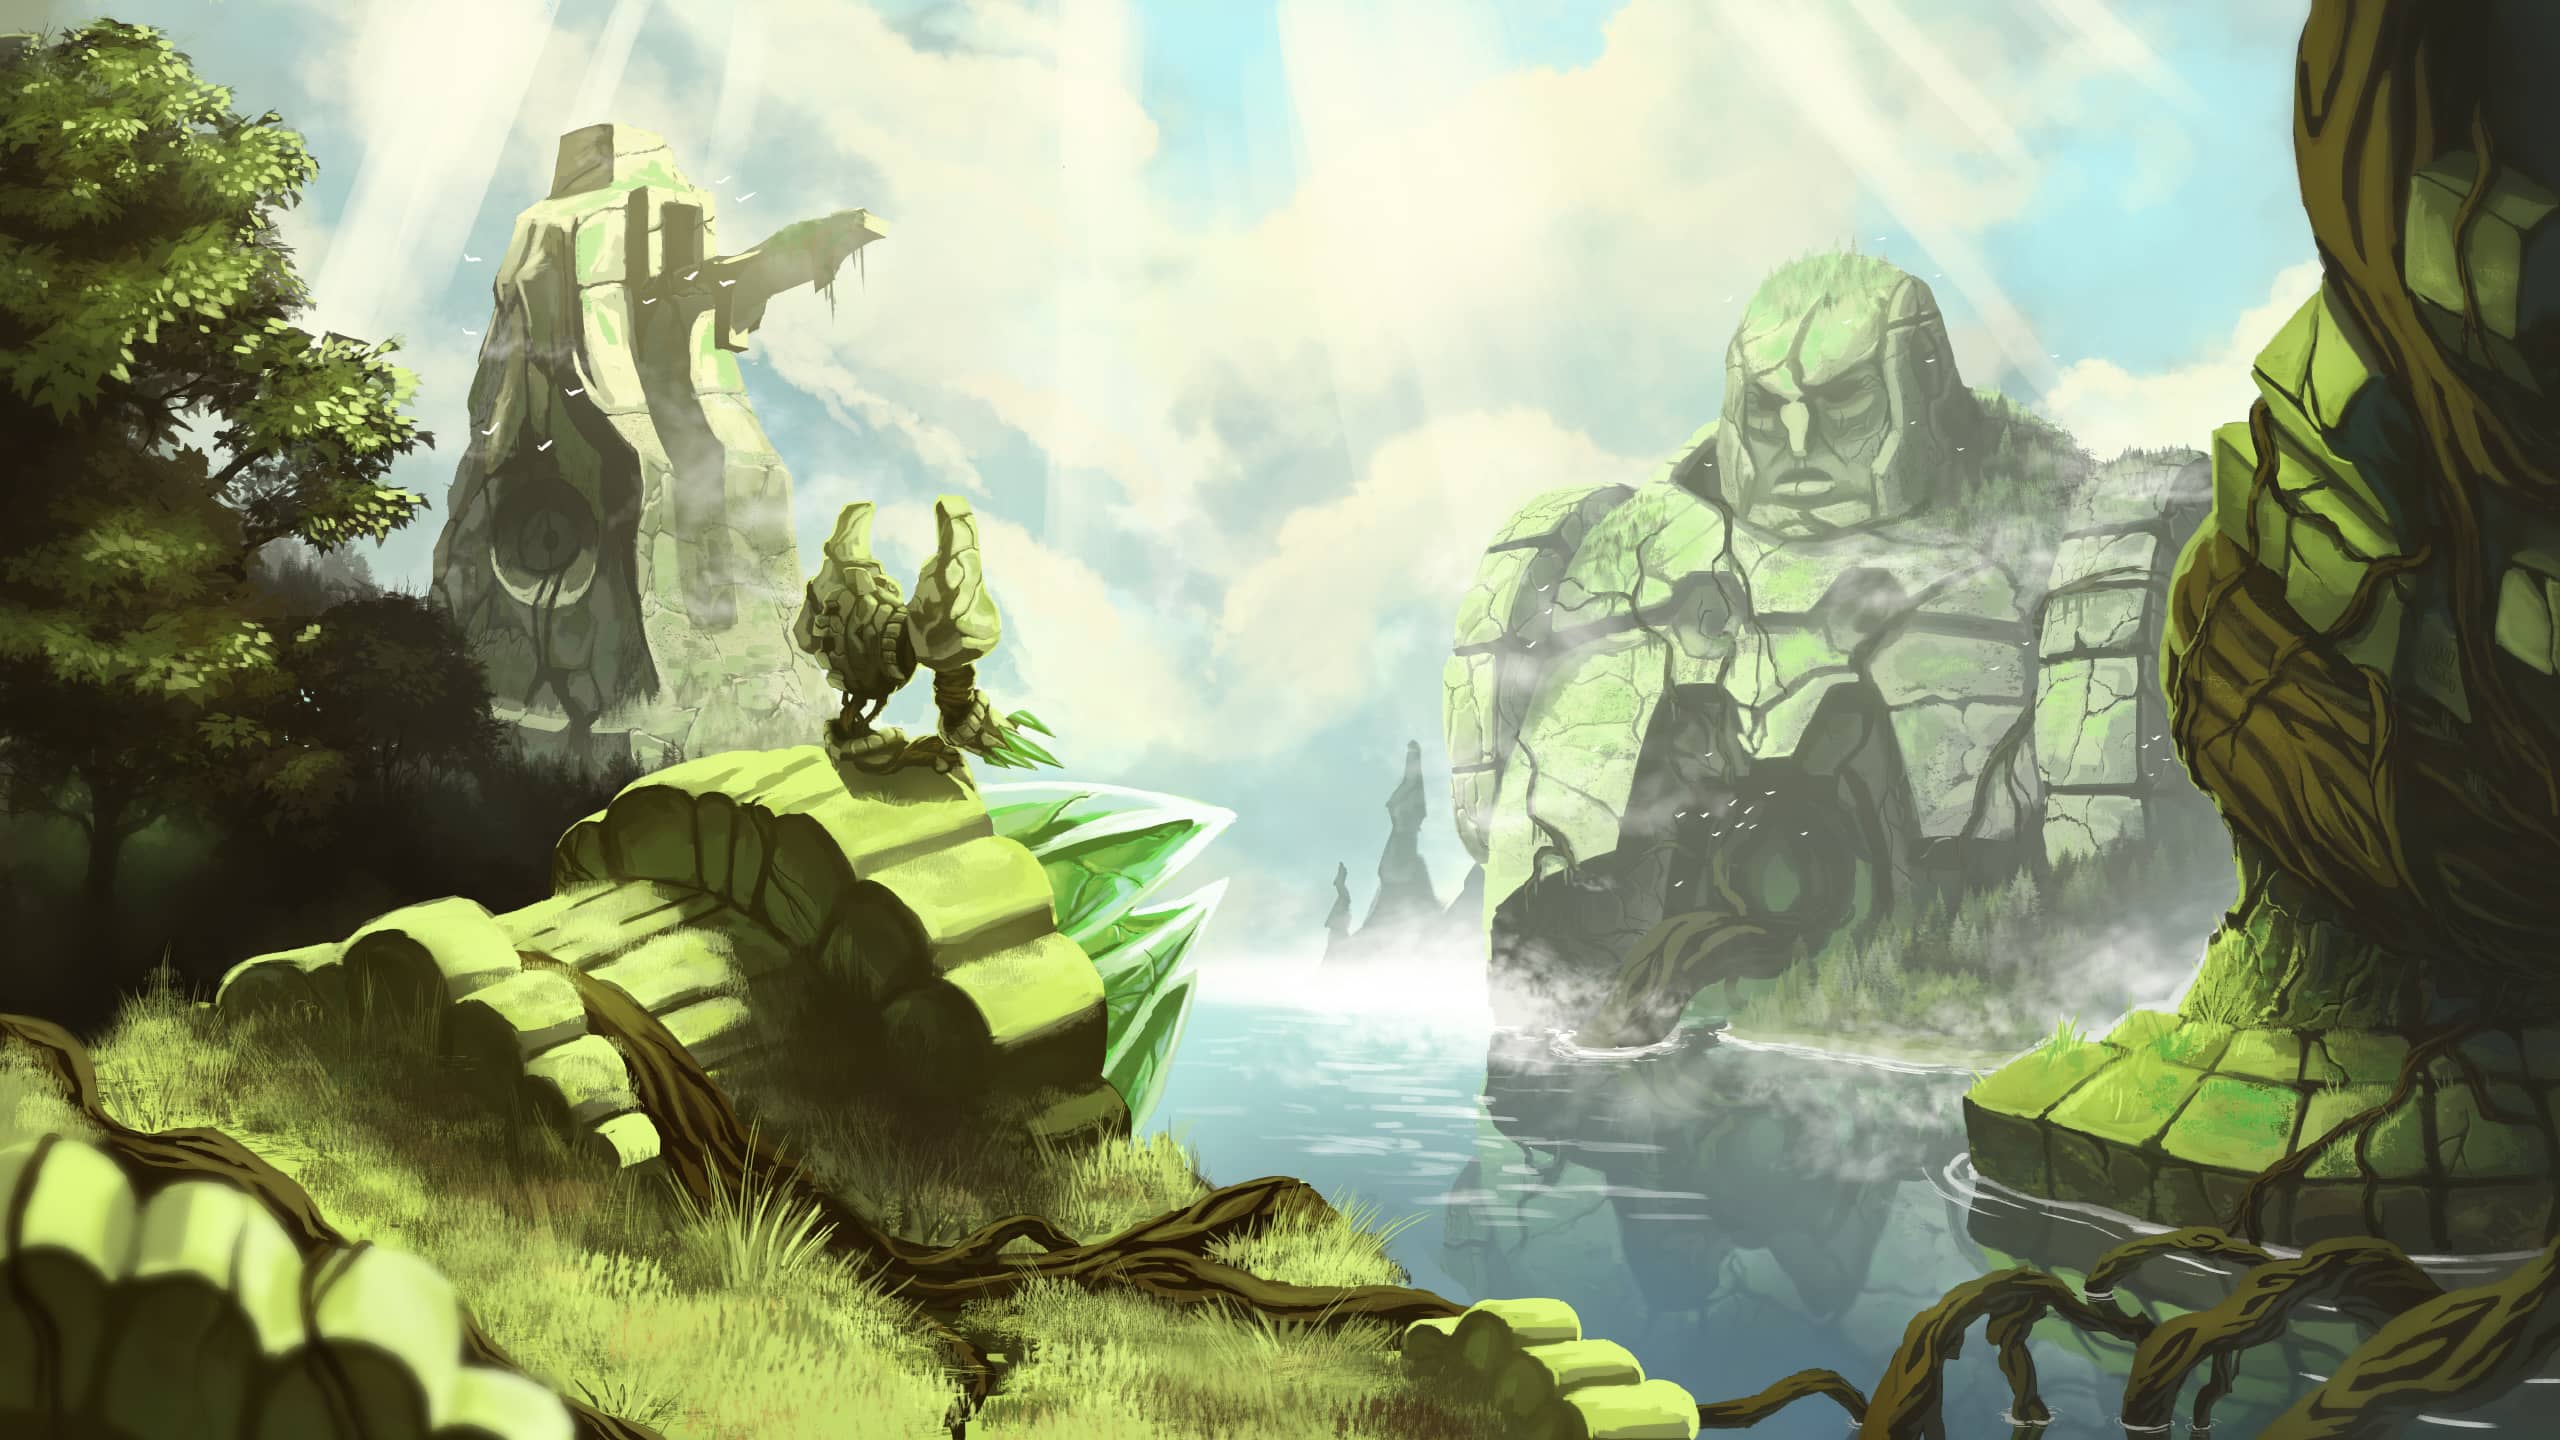 Background image of the nature faction.